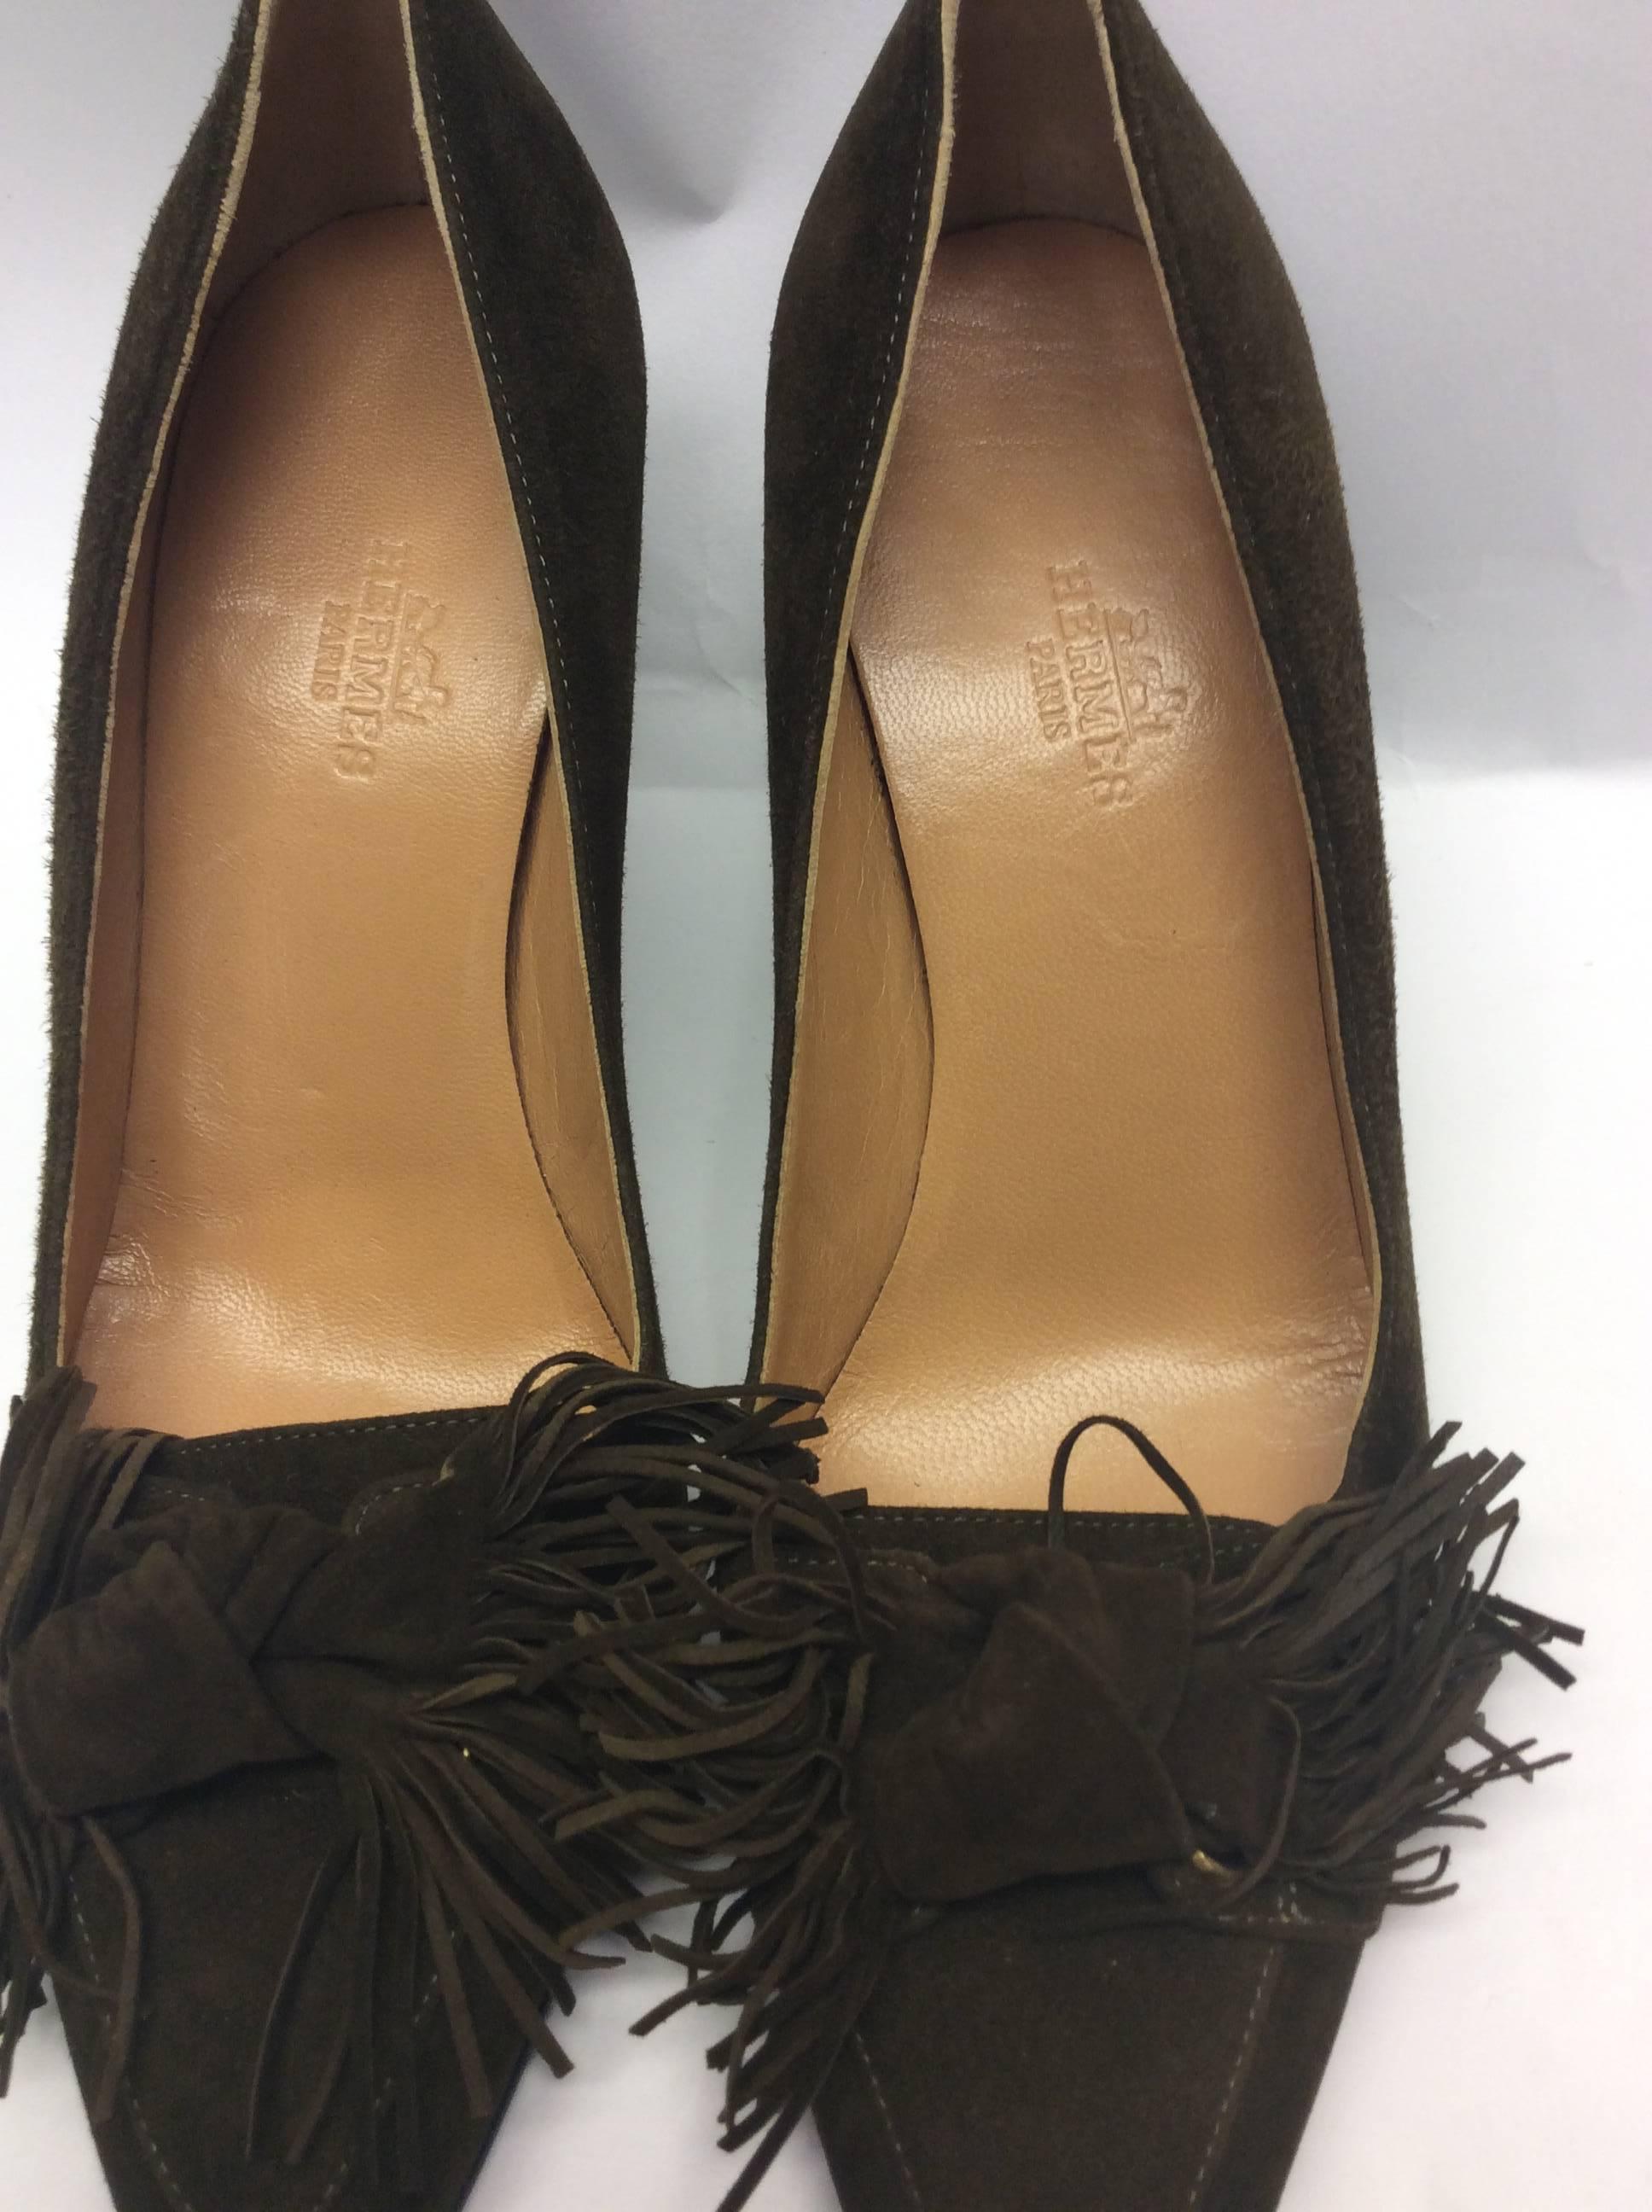 Hermes Suede Fringe Pumps
Size 36
Made in Italy
$499
2.75 inch heel
Brown in color
